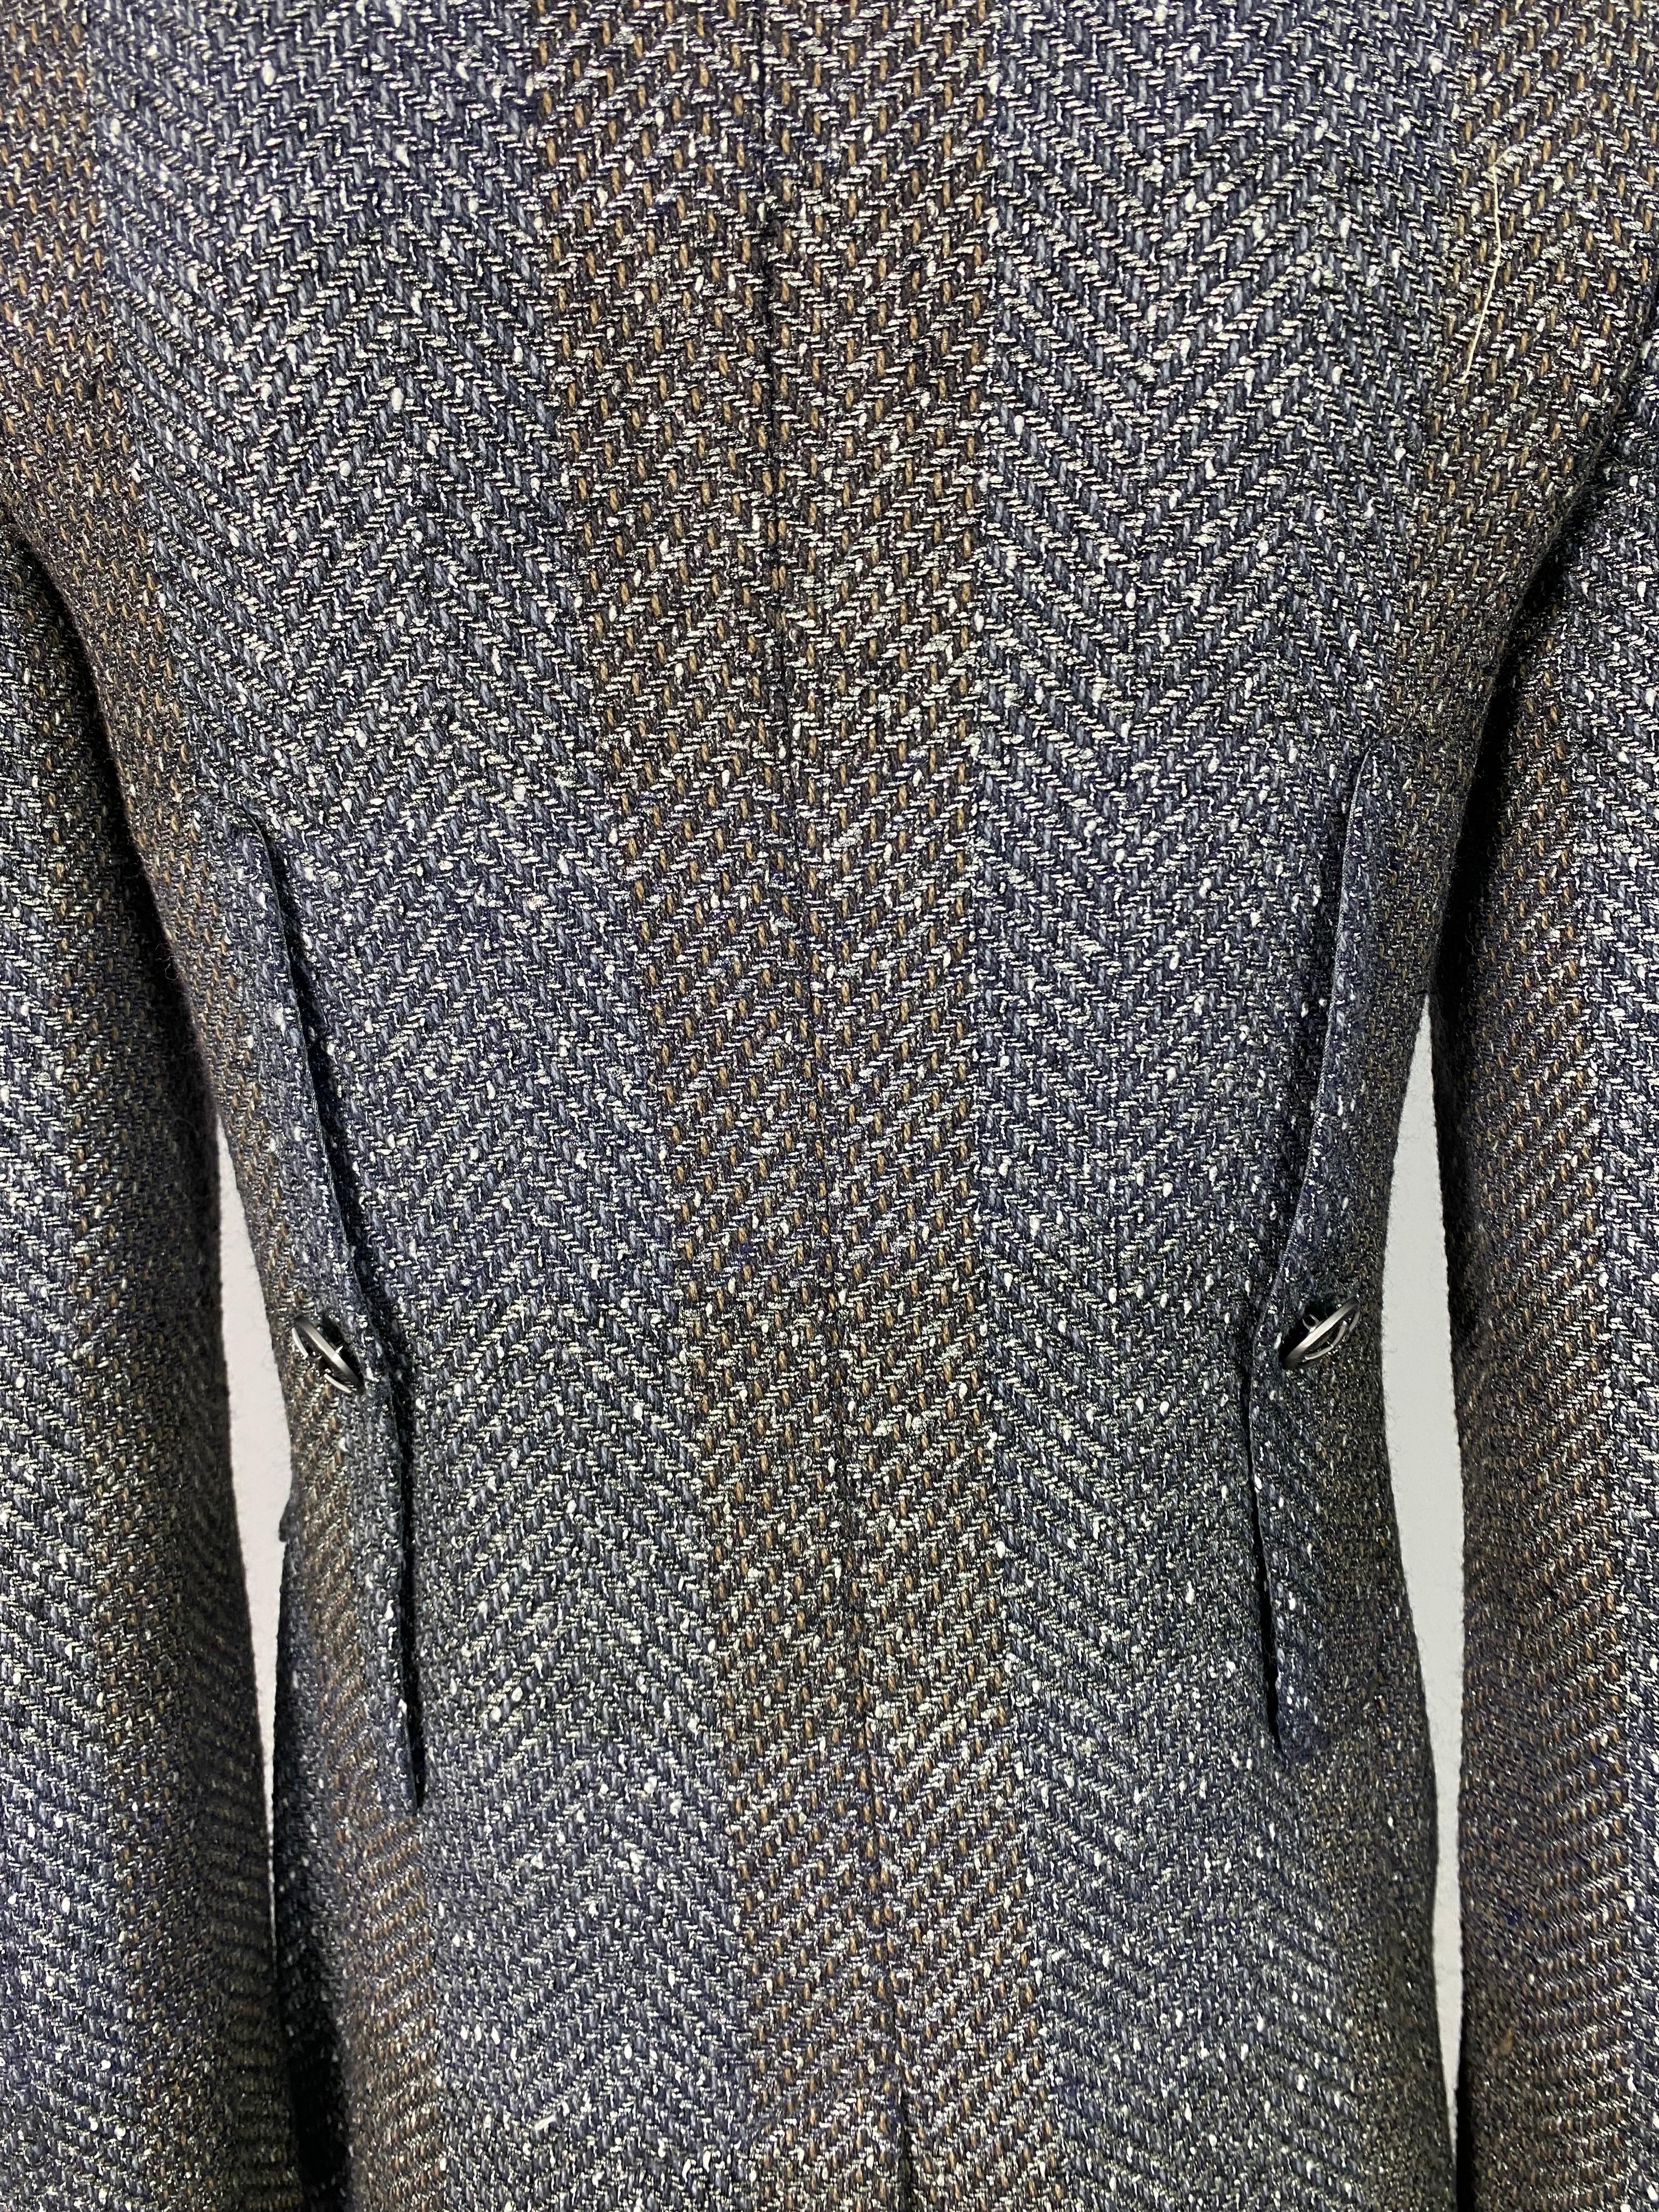 Chanel Fall 2007 Grey and Metallic Double Breasted Jacket - Size 34 For Sale 7